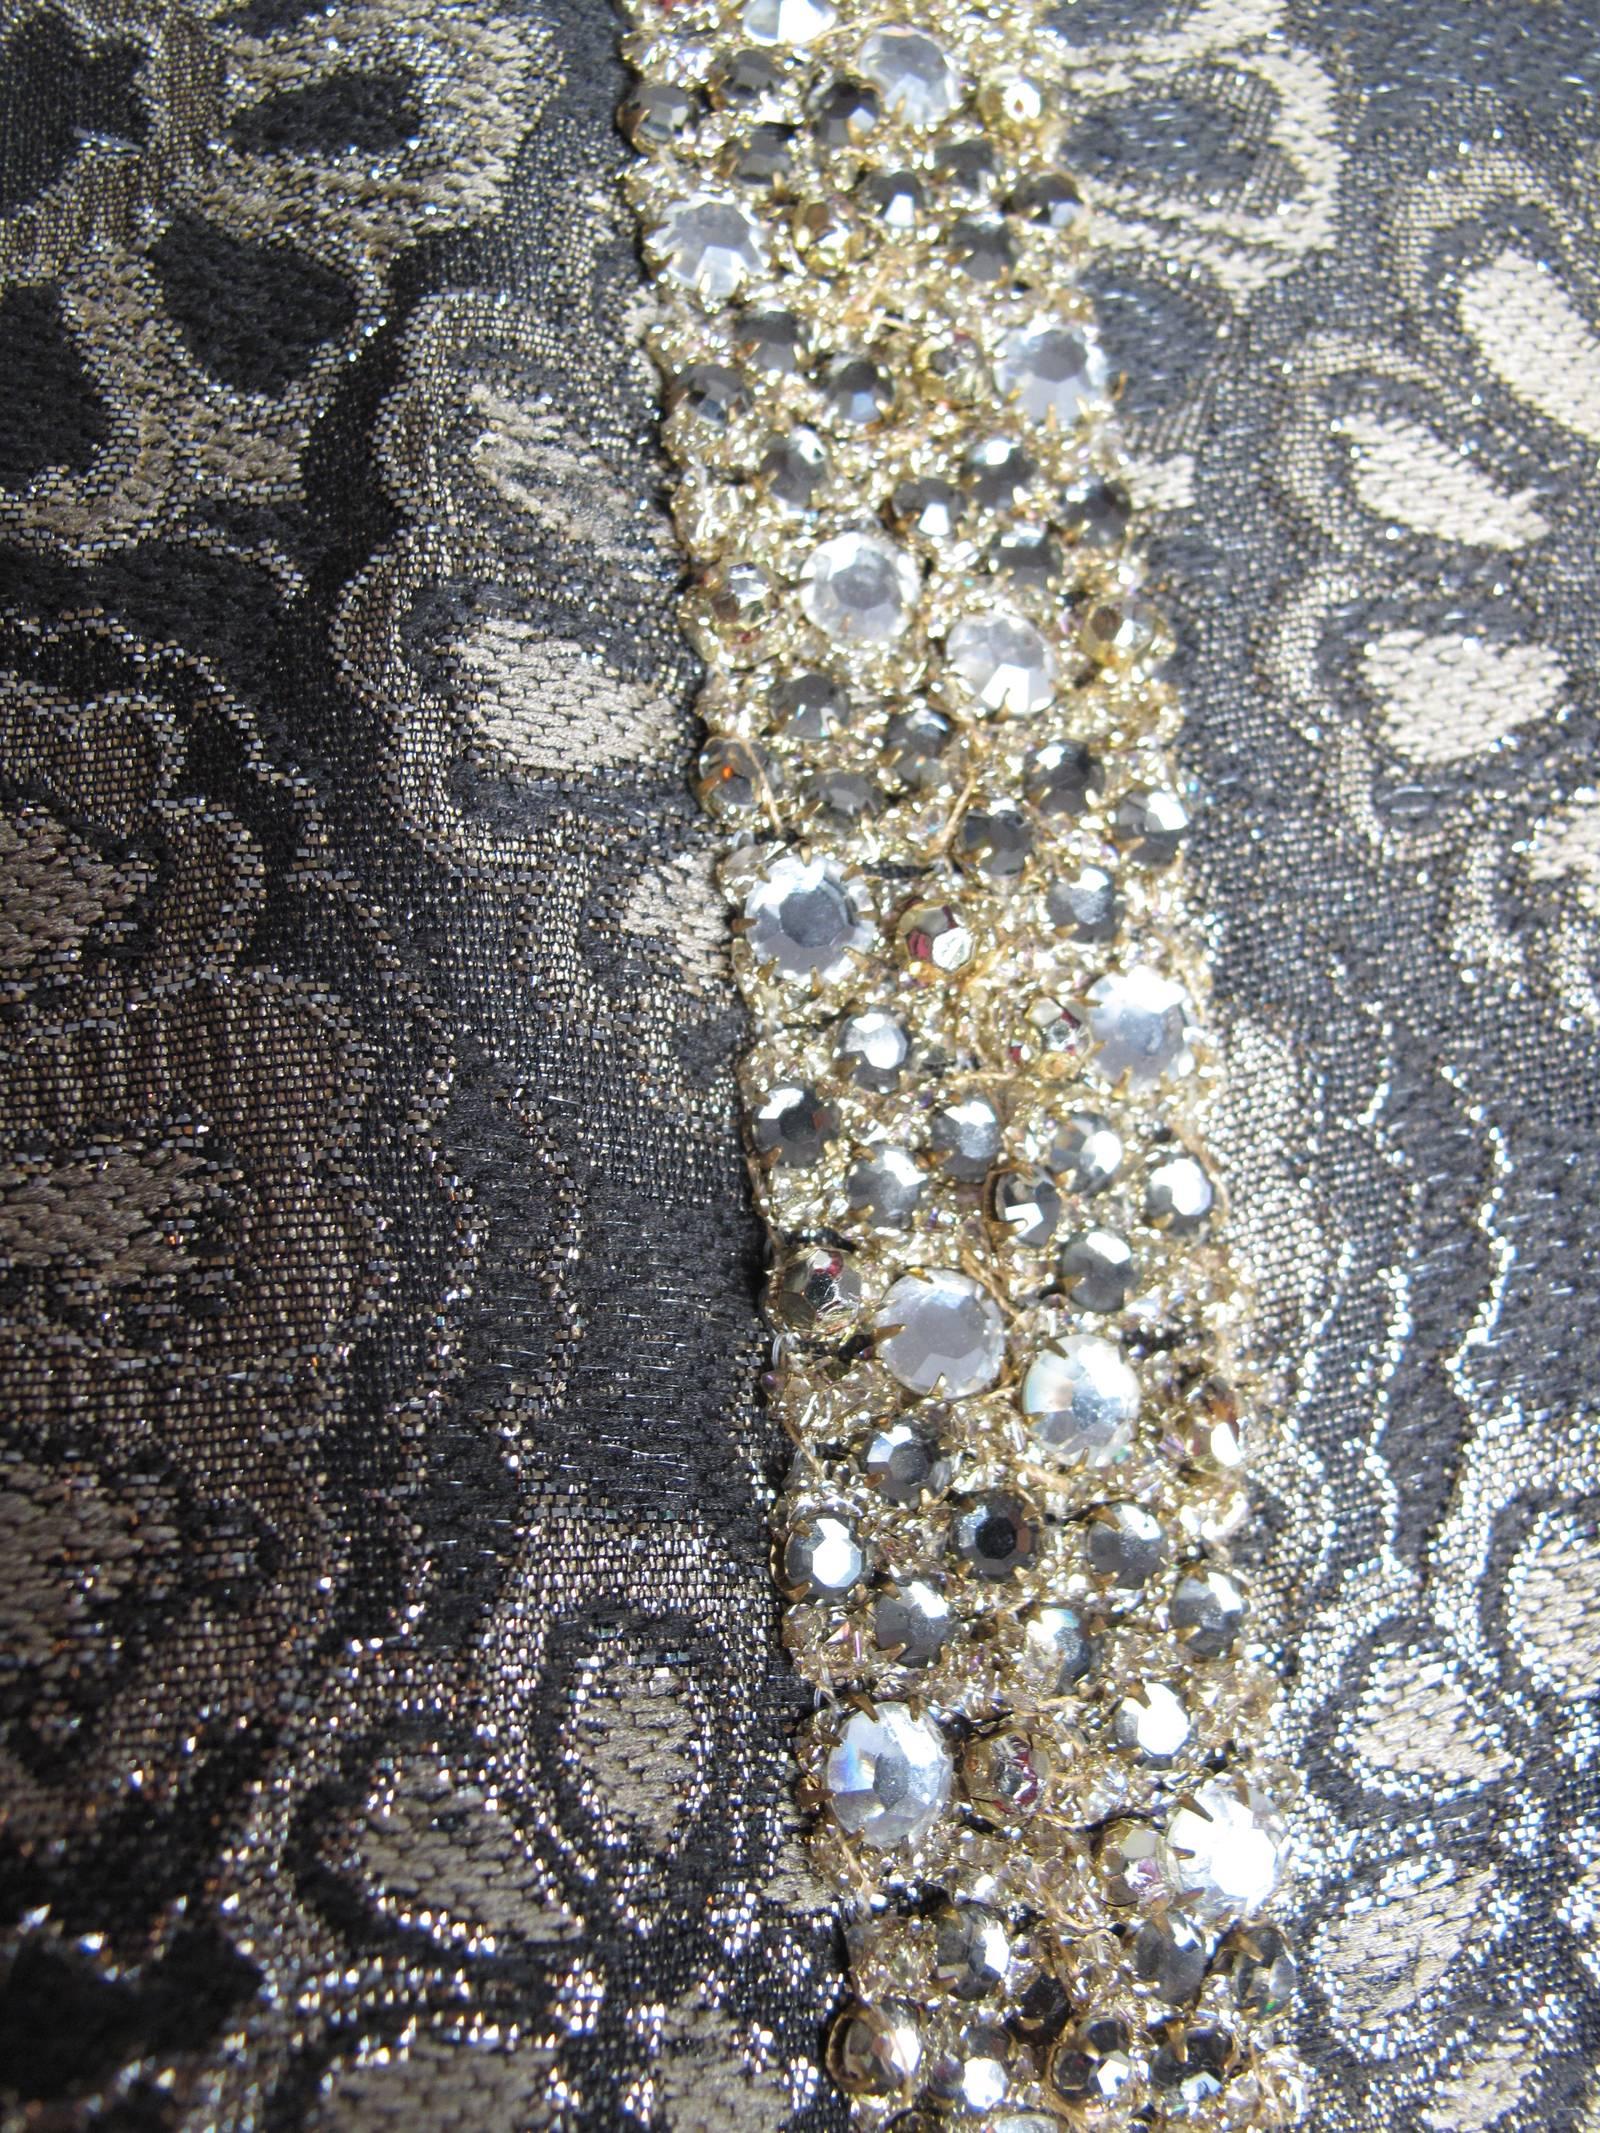 Adele Simpson brocade and rhinestone dress.  Condition: Very good, some brocade coming undone at cuffs.  Size 8

39